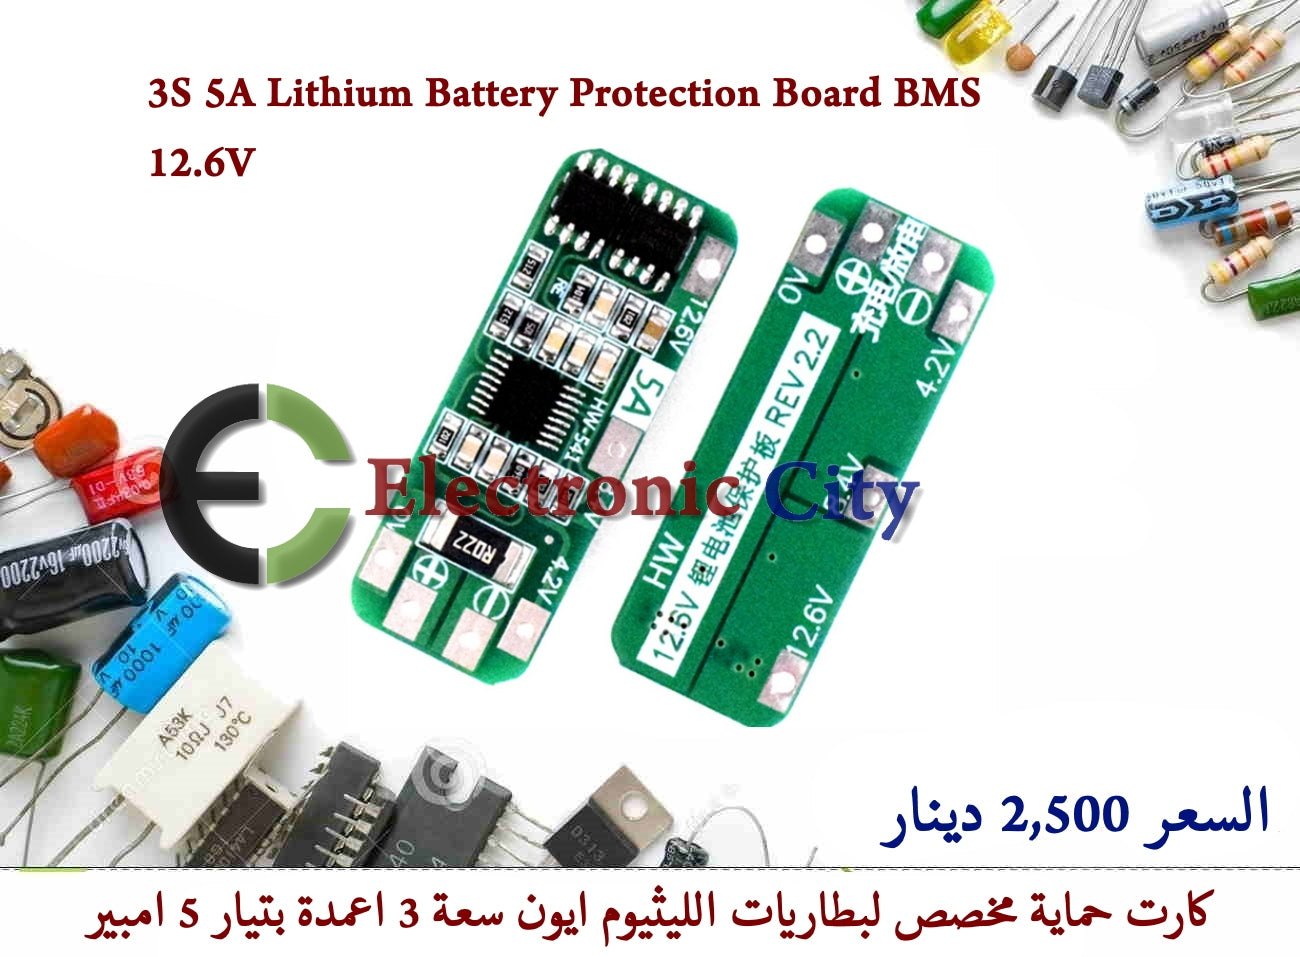 3S 5A Lithium Battery Protection Board BMS 12.6V